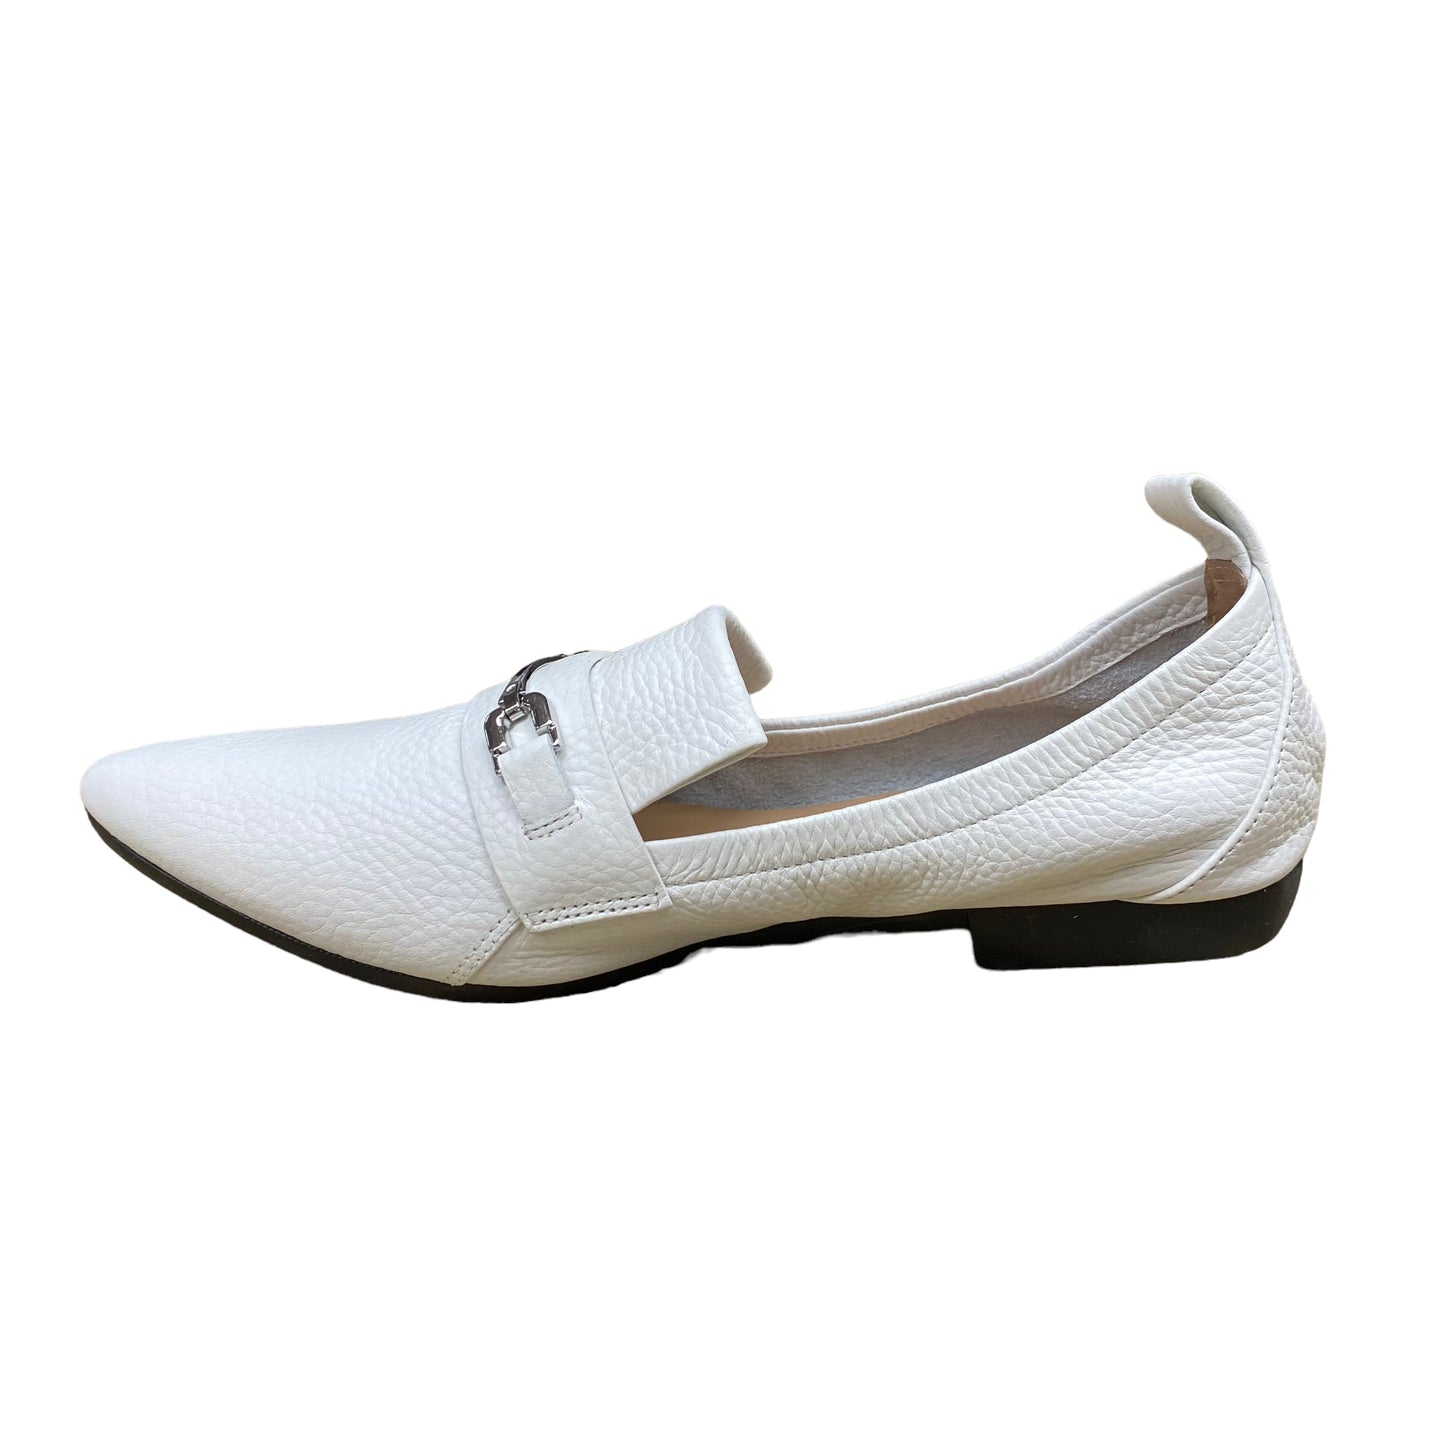 Shoes Flats By Linea Paolo  Size: 7